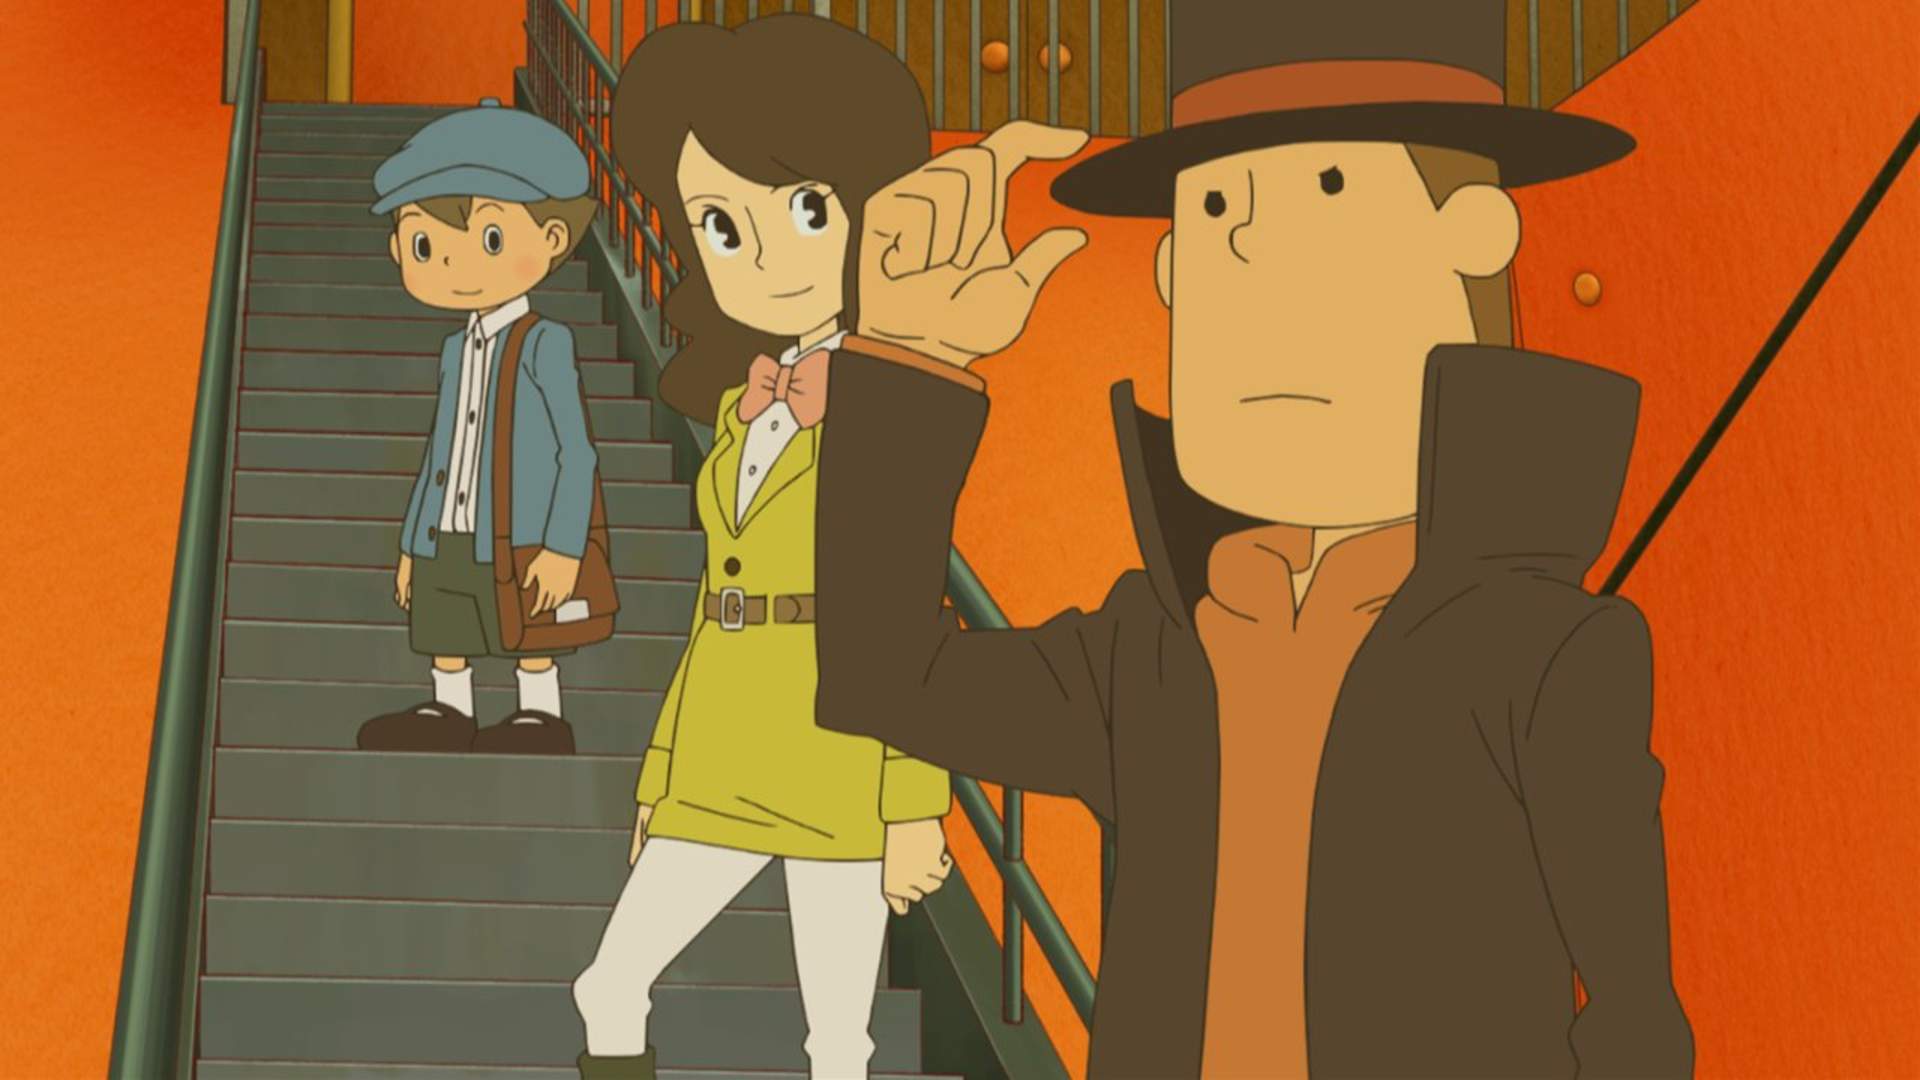 The professor, Emmy, and Luke stand on the steps of their airship in a screenshot from "Professor Layton and the Azran Legacy", 2013 (Image from Level-5/Nintendo).